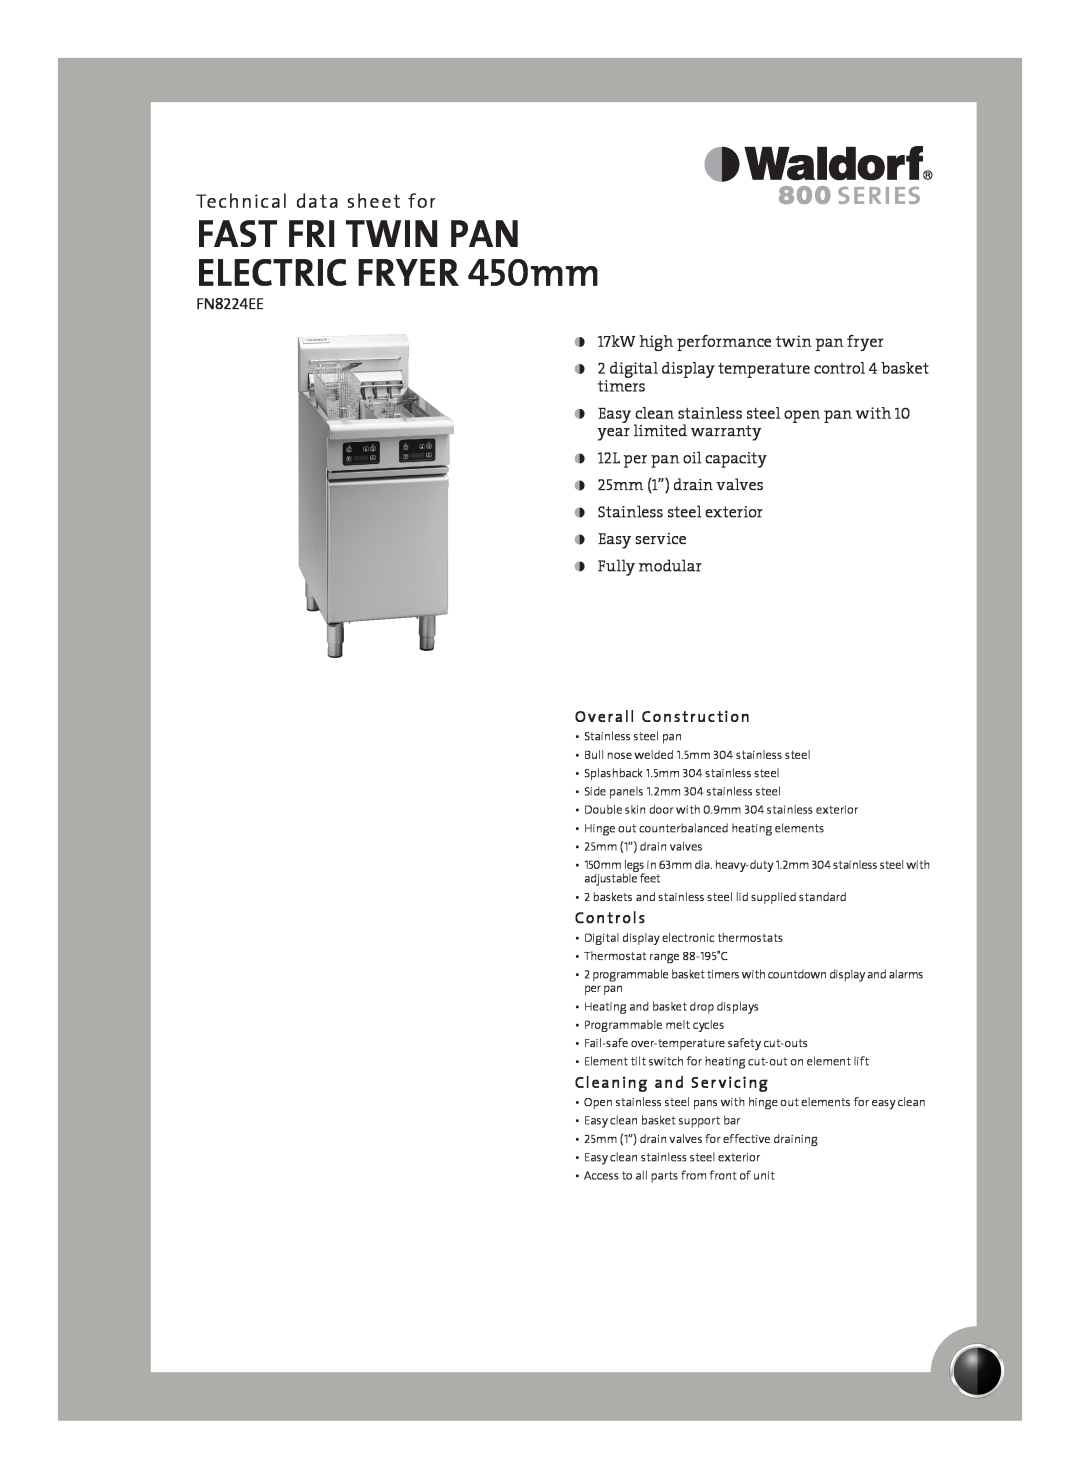 Moffat FN8224EE warranty Technical data sheet for, Overall Construction, Controls, Cleaning and Ser vicing 